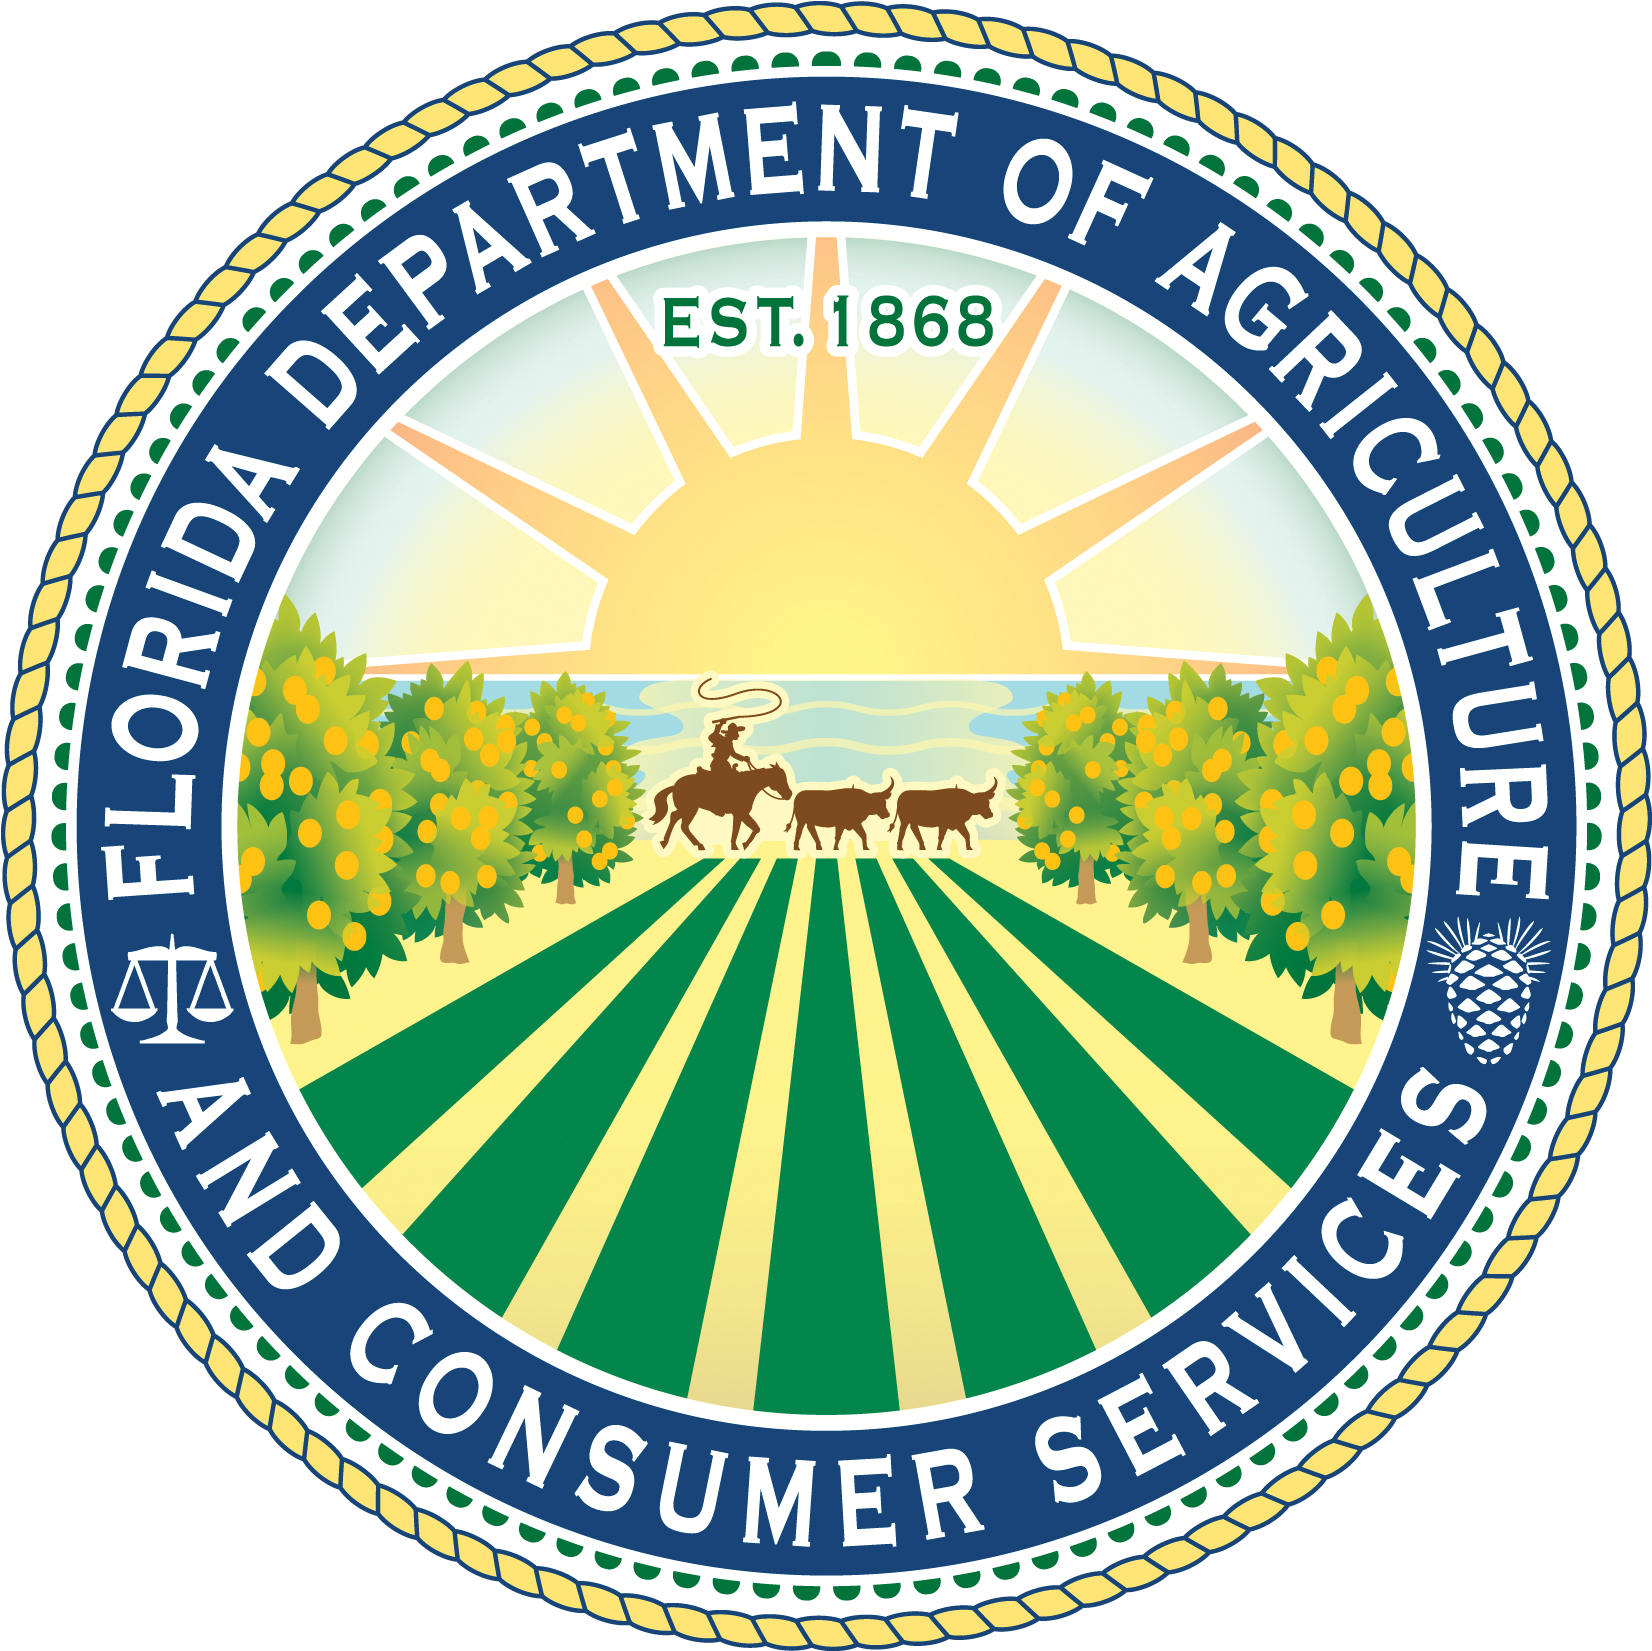 Brown Bag Clipart - Florida Department Of Agriculture And Consumer Services (1680x1680)